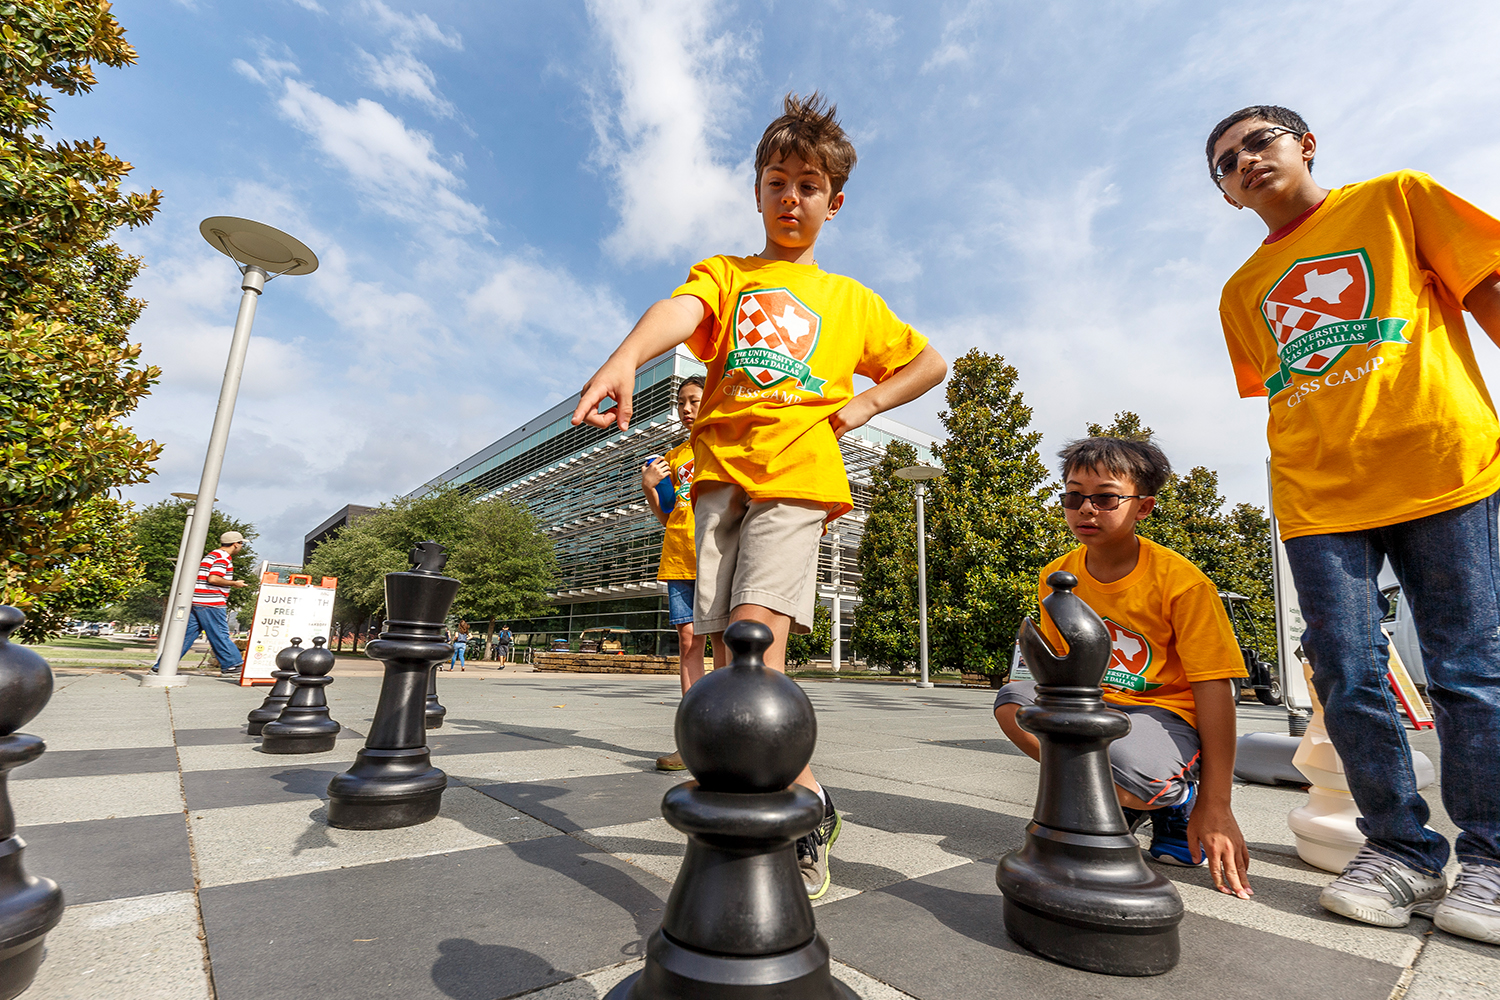 Children play a game of chess with giant pieces on an outdoor chessboard on the campus of The University of Texas at Dallas.